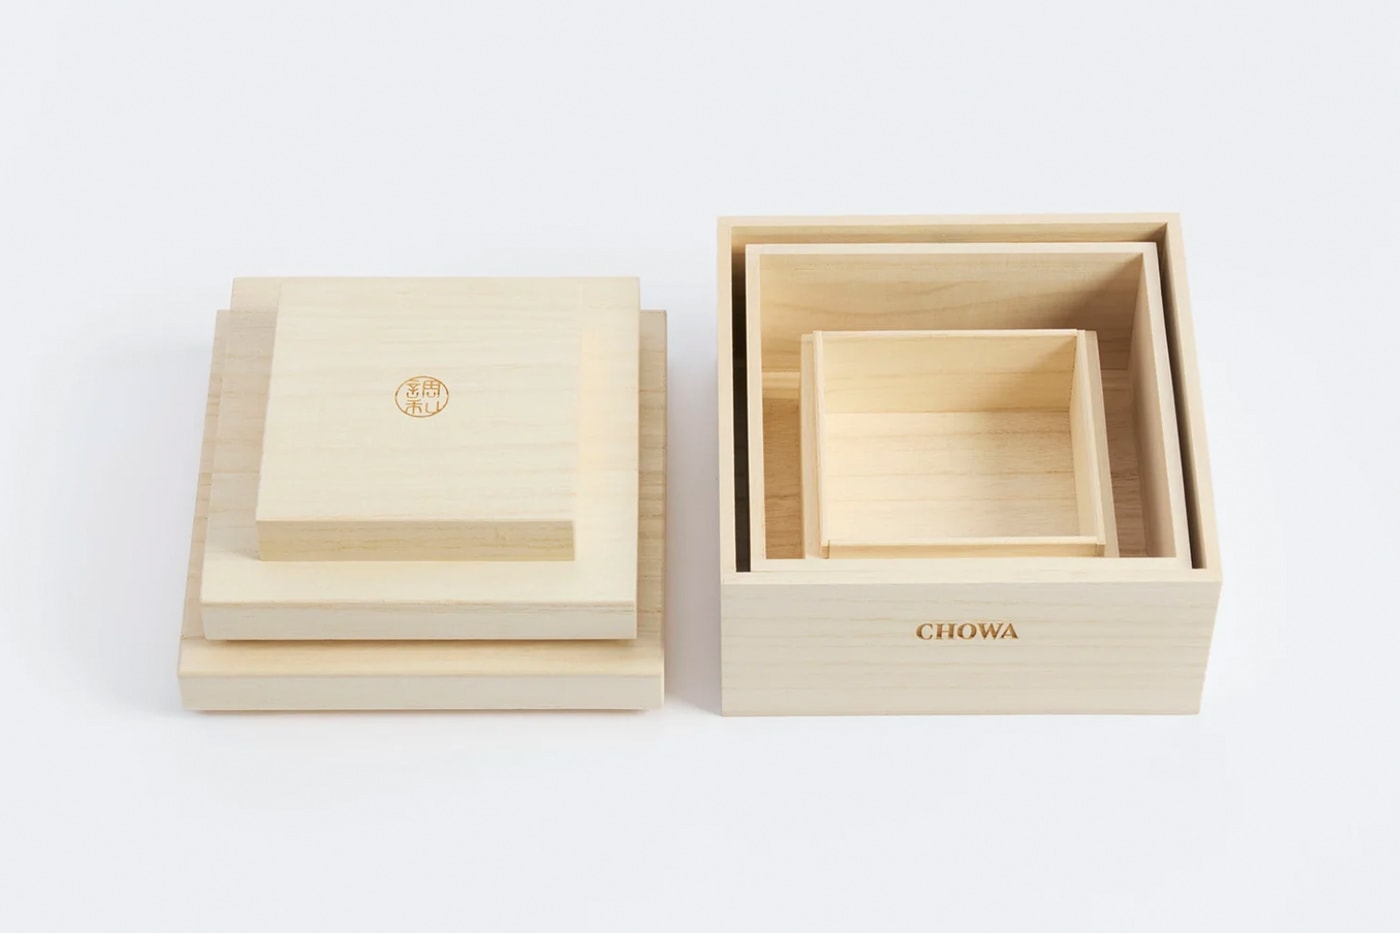 Chowa Item #001, “Frames of Reference” Release Info